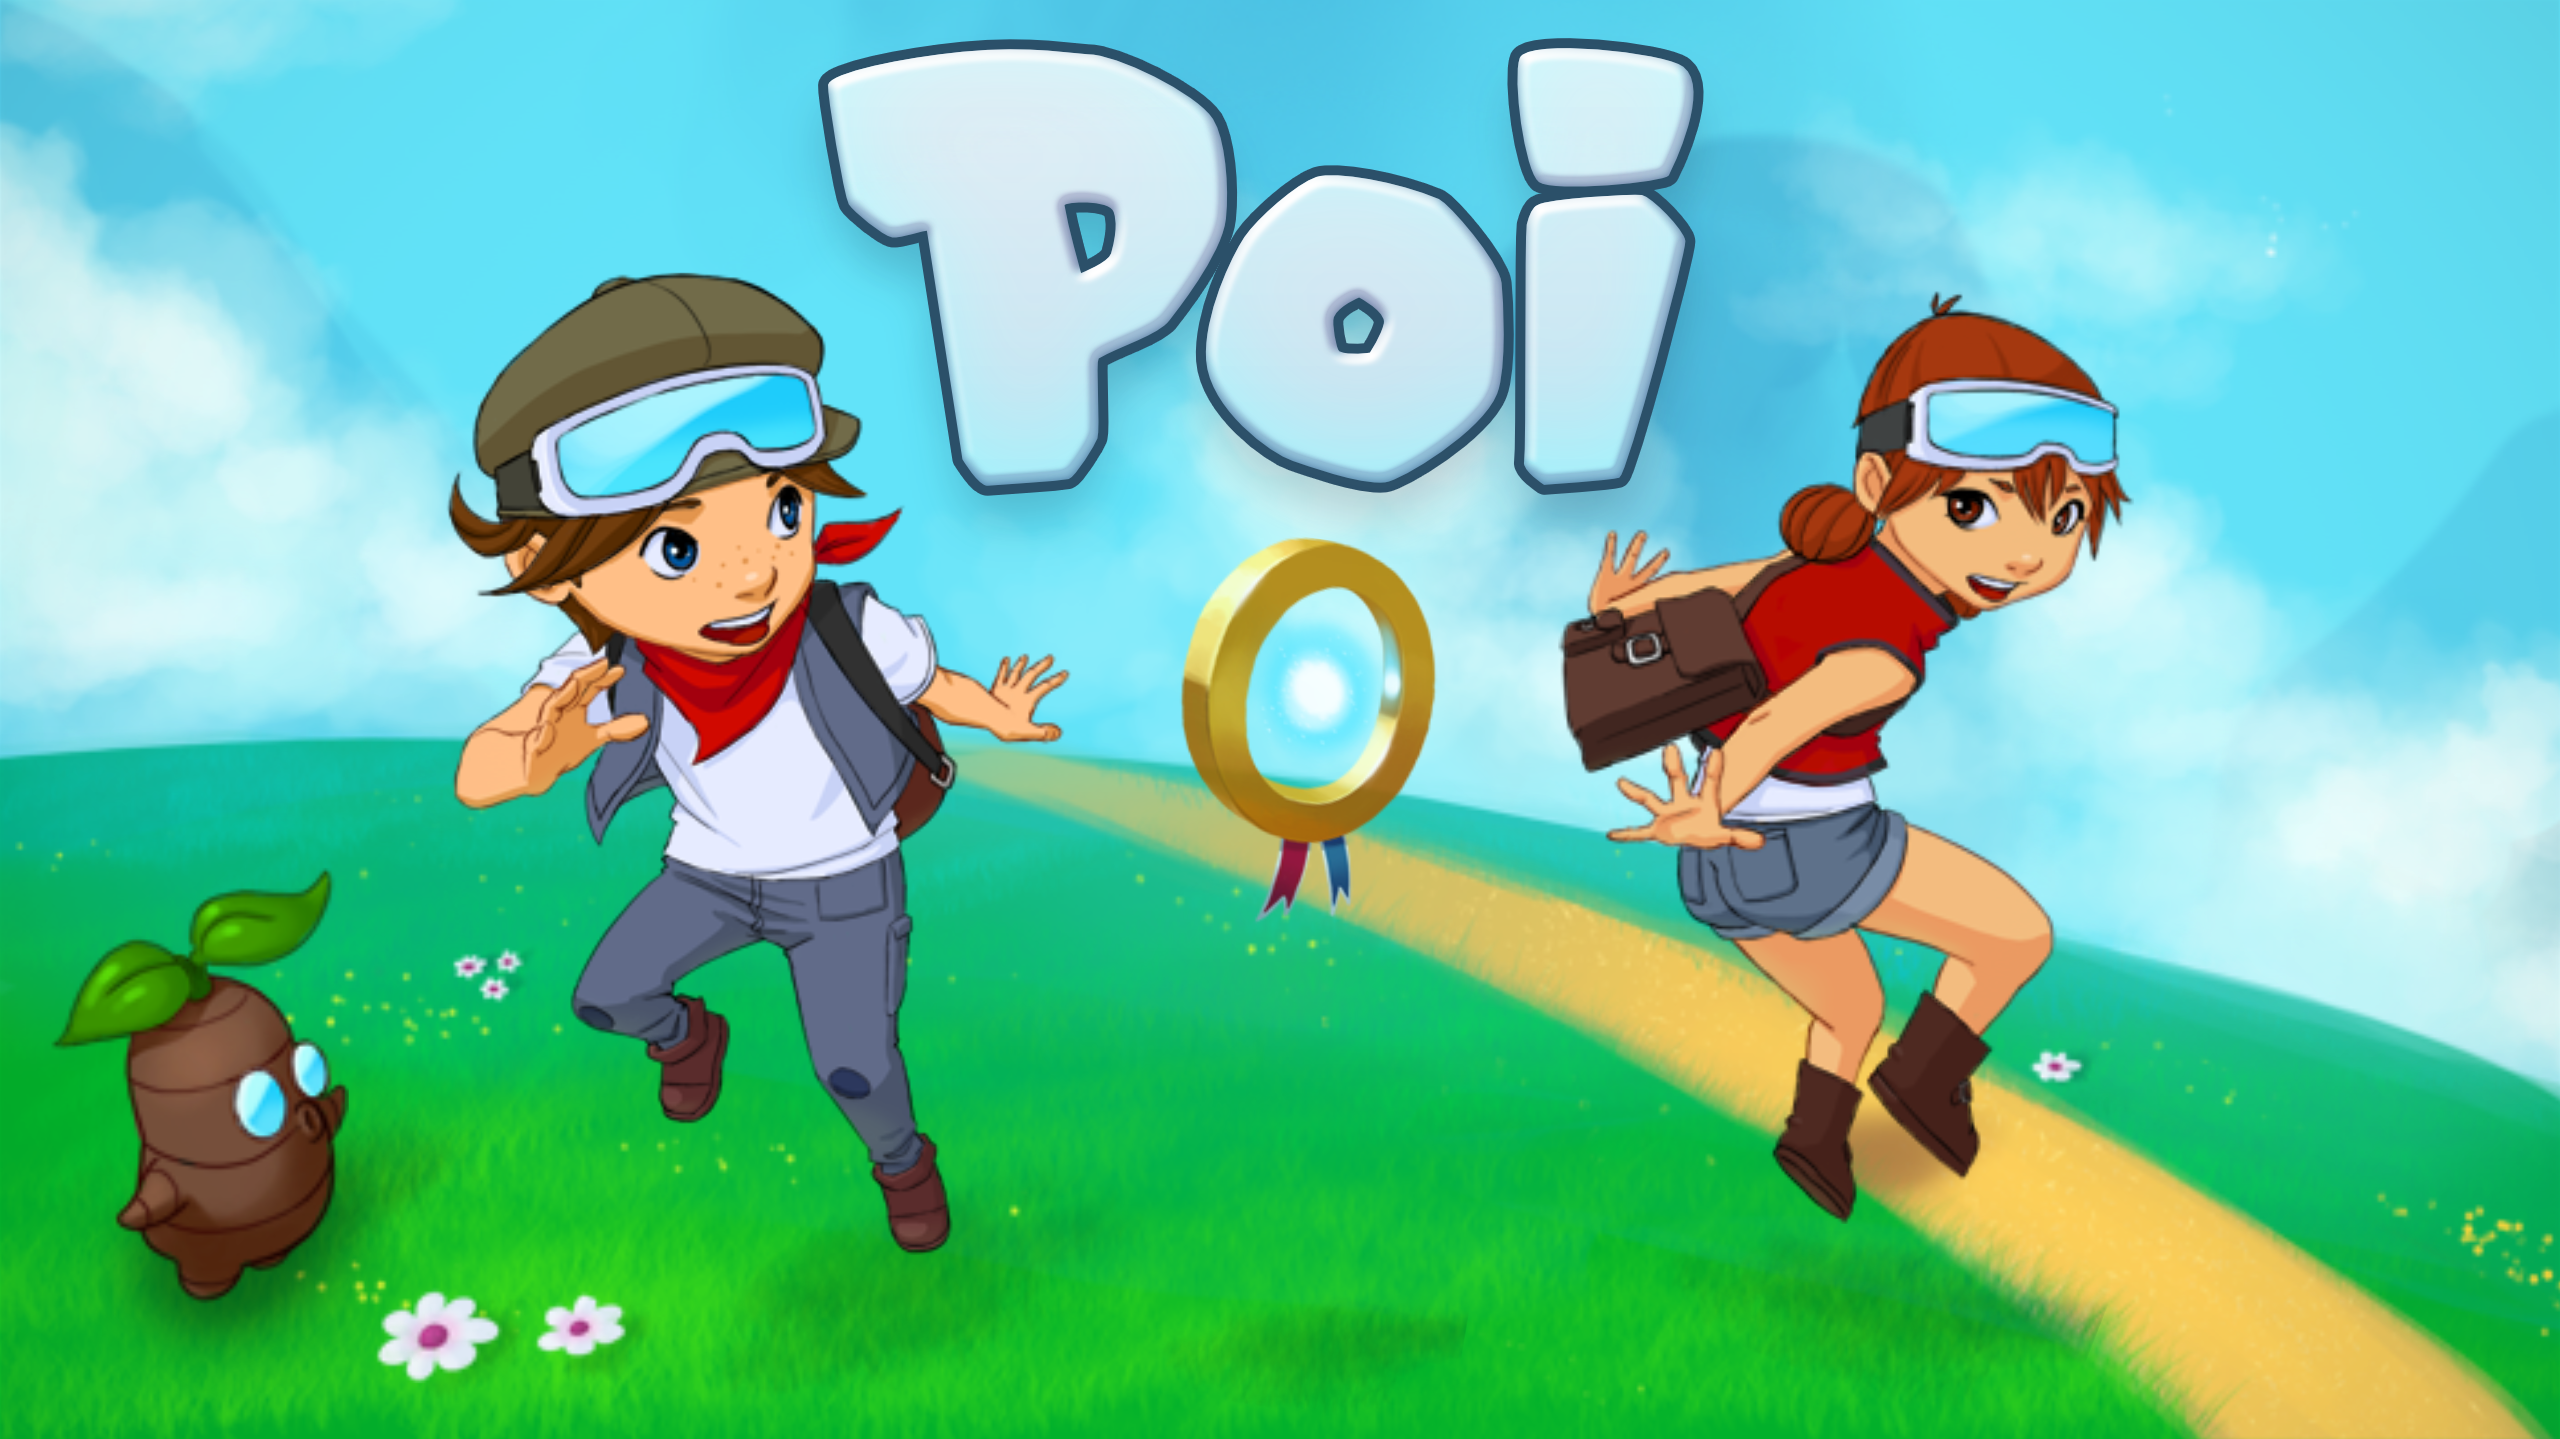 Poi Coming Soon   Epic Games Store